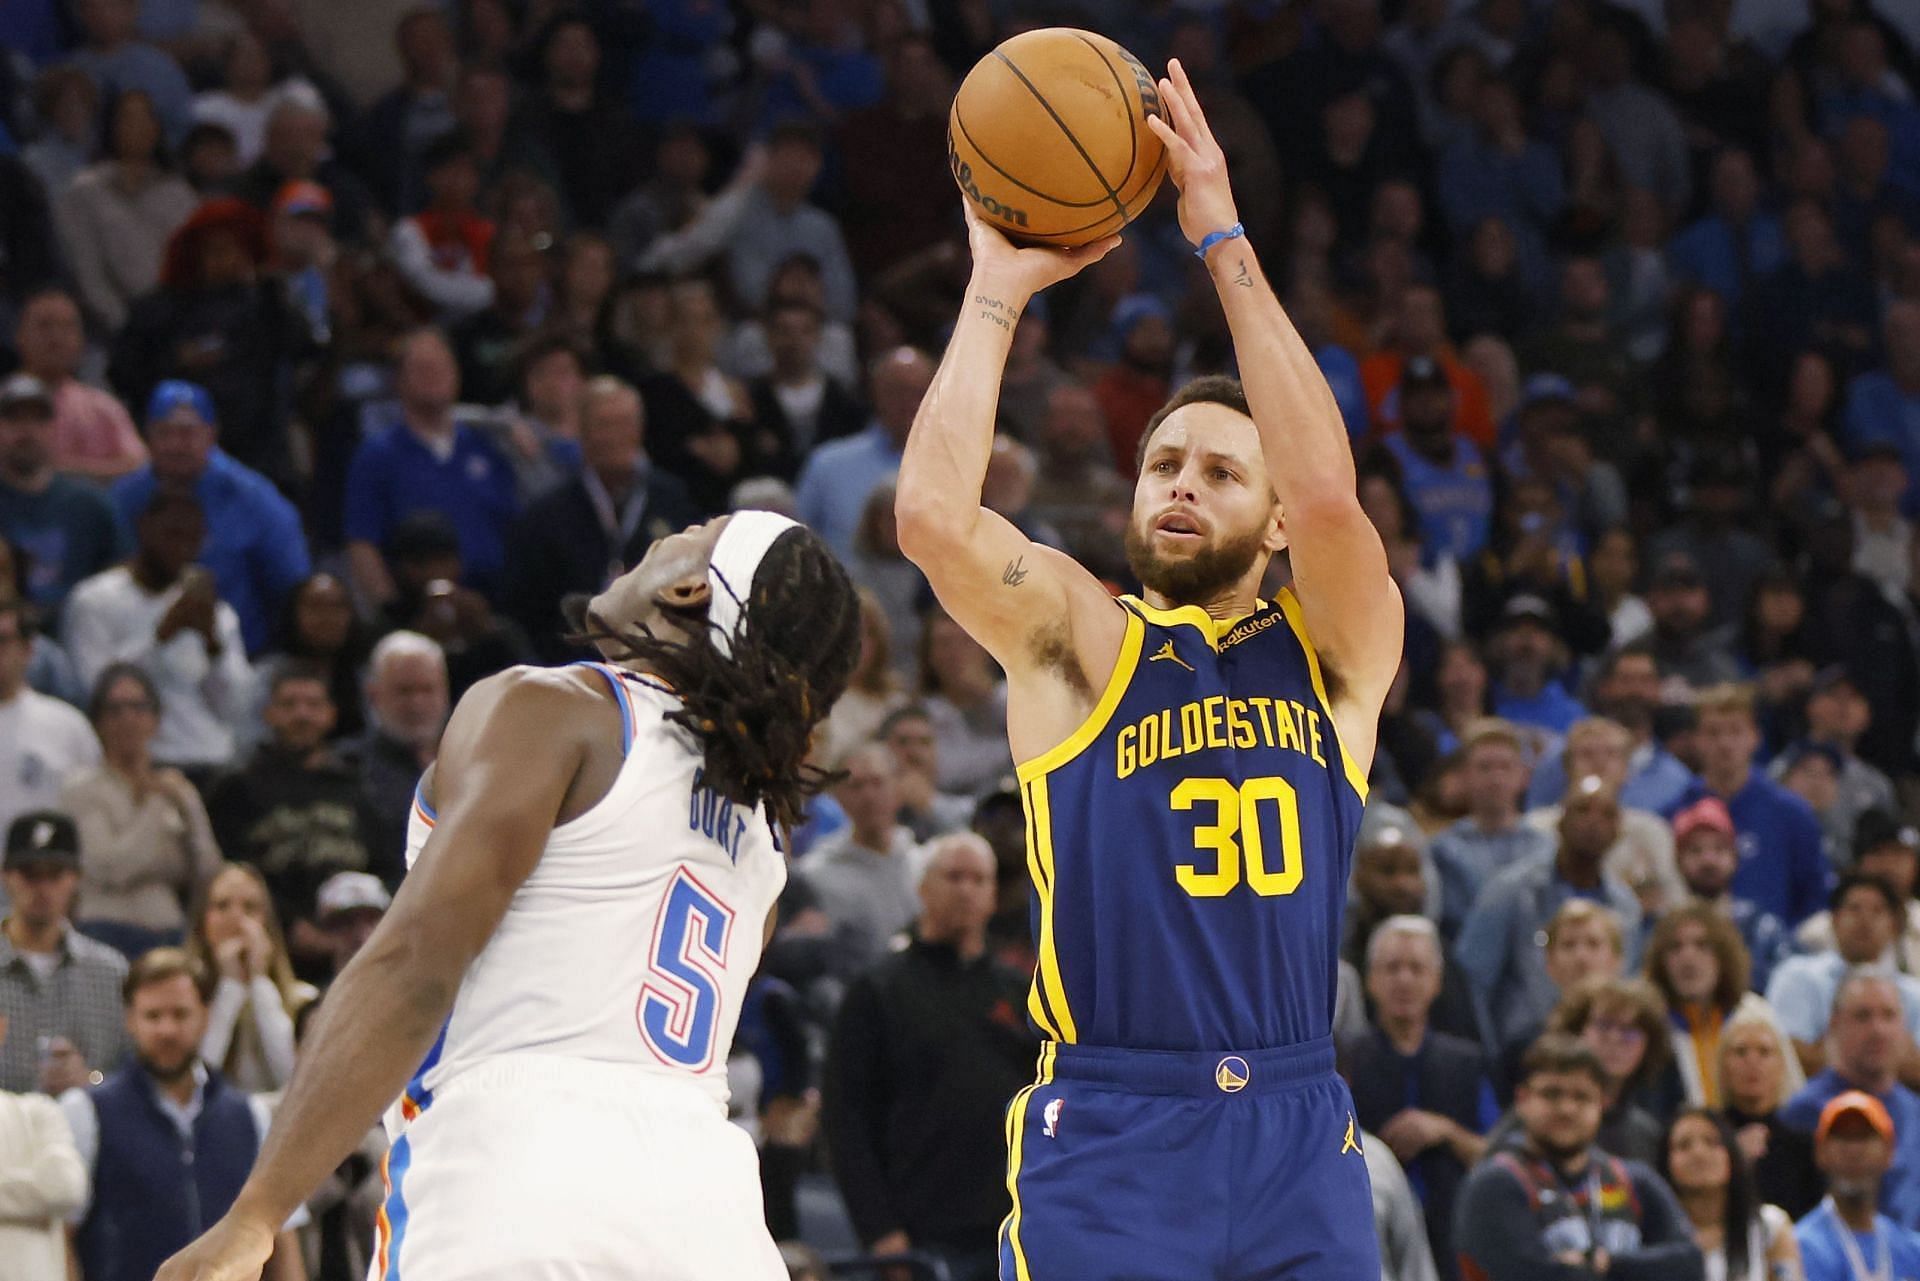 Steph Curry and the Golden State Warriors blew a 14-point first-half lead to lose to the OKC Thunder in overtime on Friday.